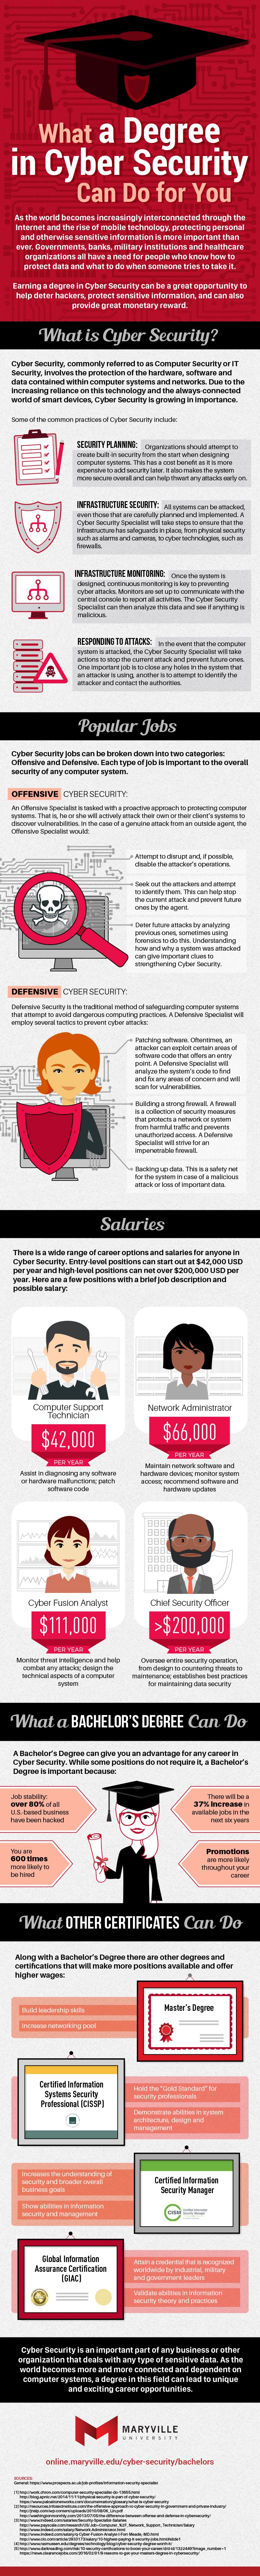 What a Degree in Cyber Security Can Do For You #infographic